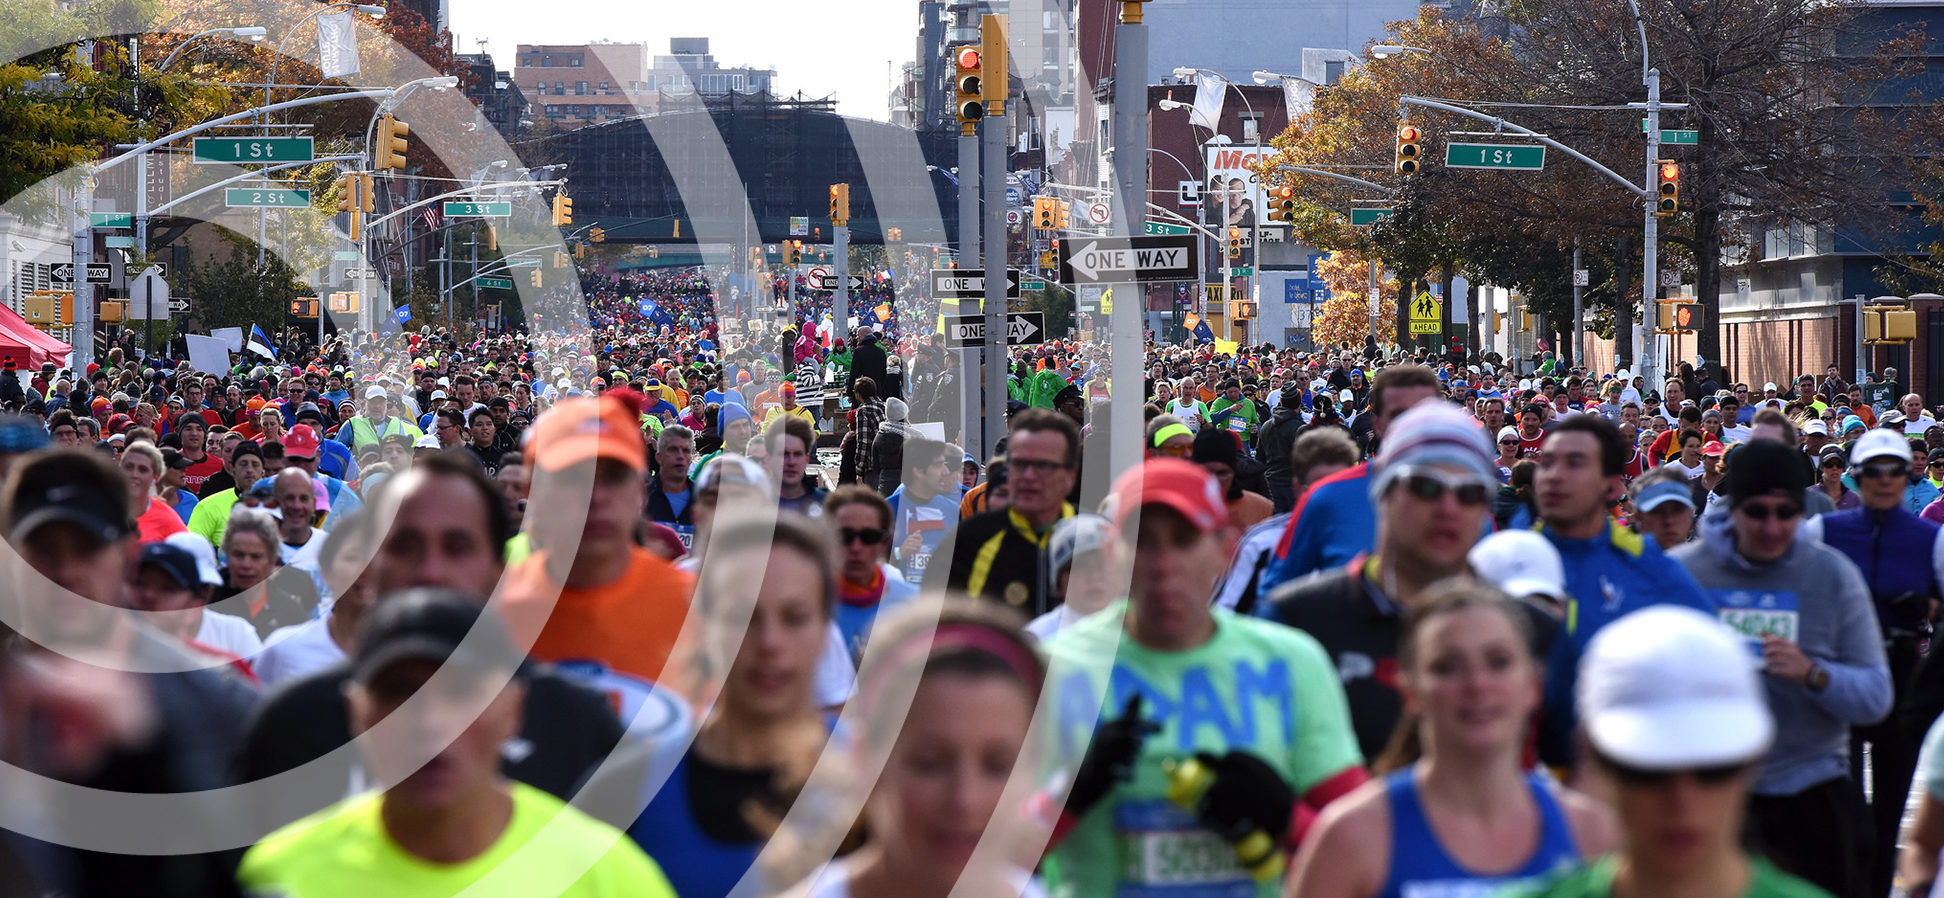 Your 2021 Guide to the NYC Marathon: Parking, Maps & More